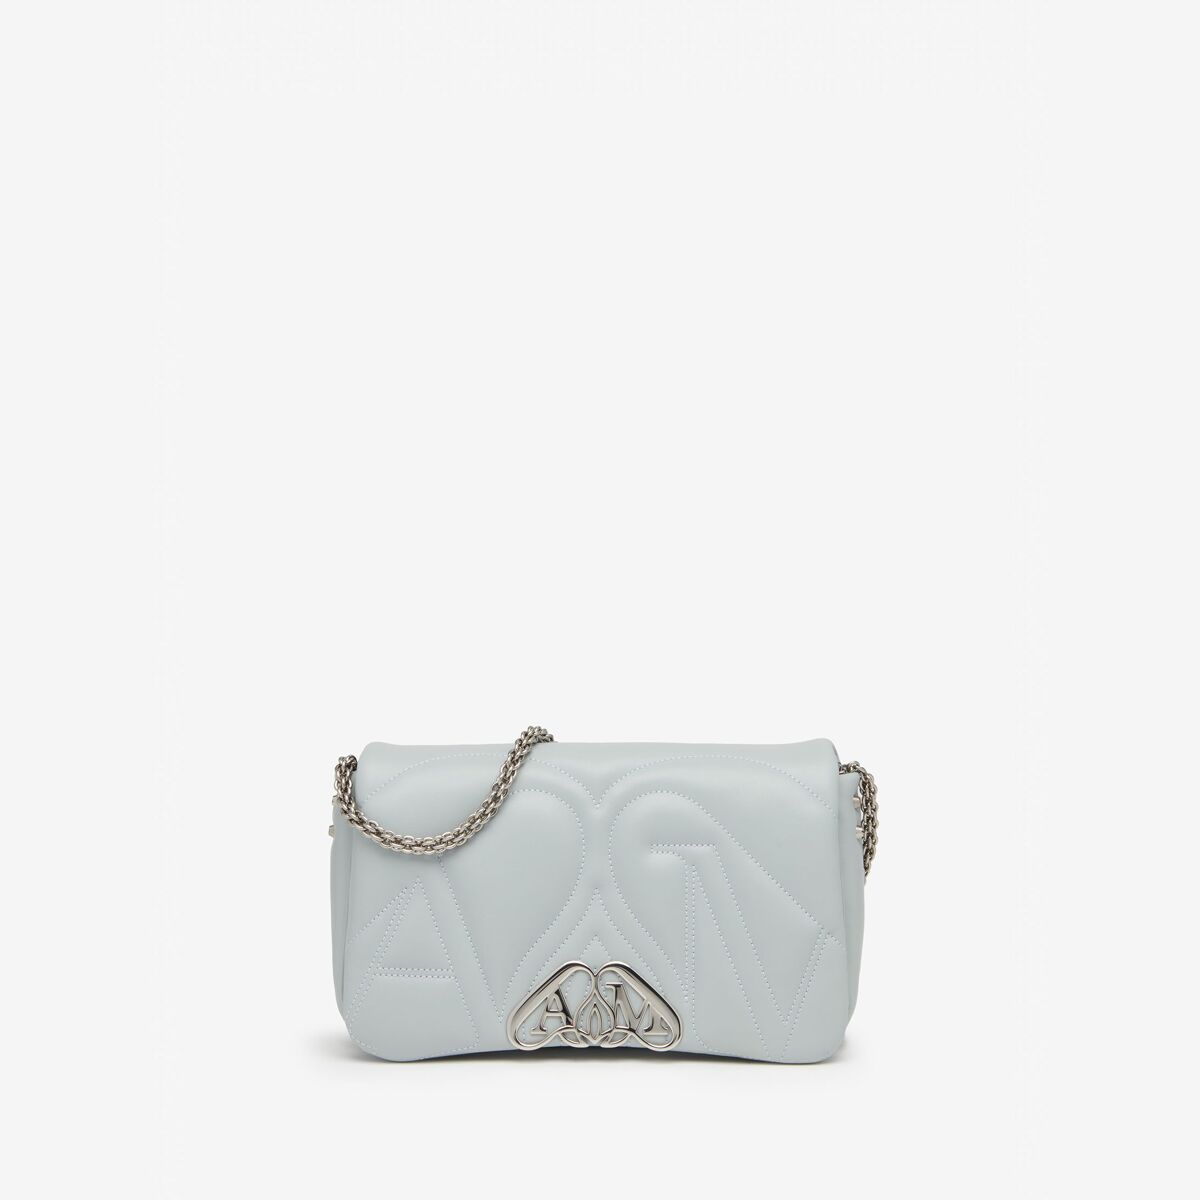 ALEXANDER MCQUEEN - The Seal Small Bag - Item 7573751BLE24934